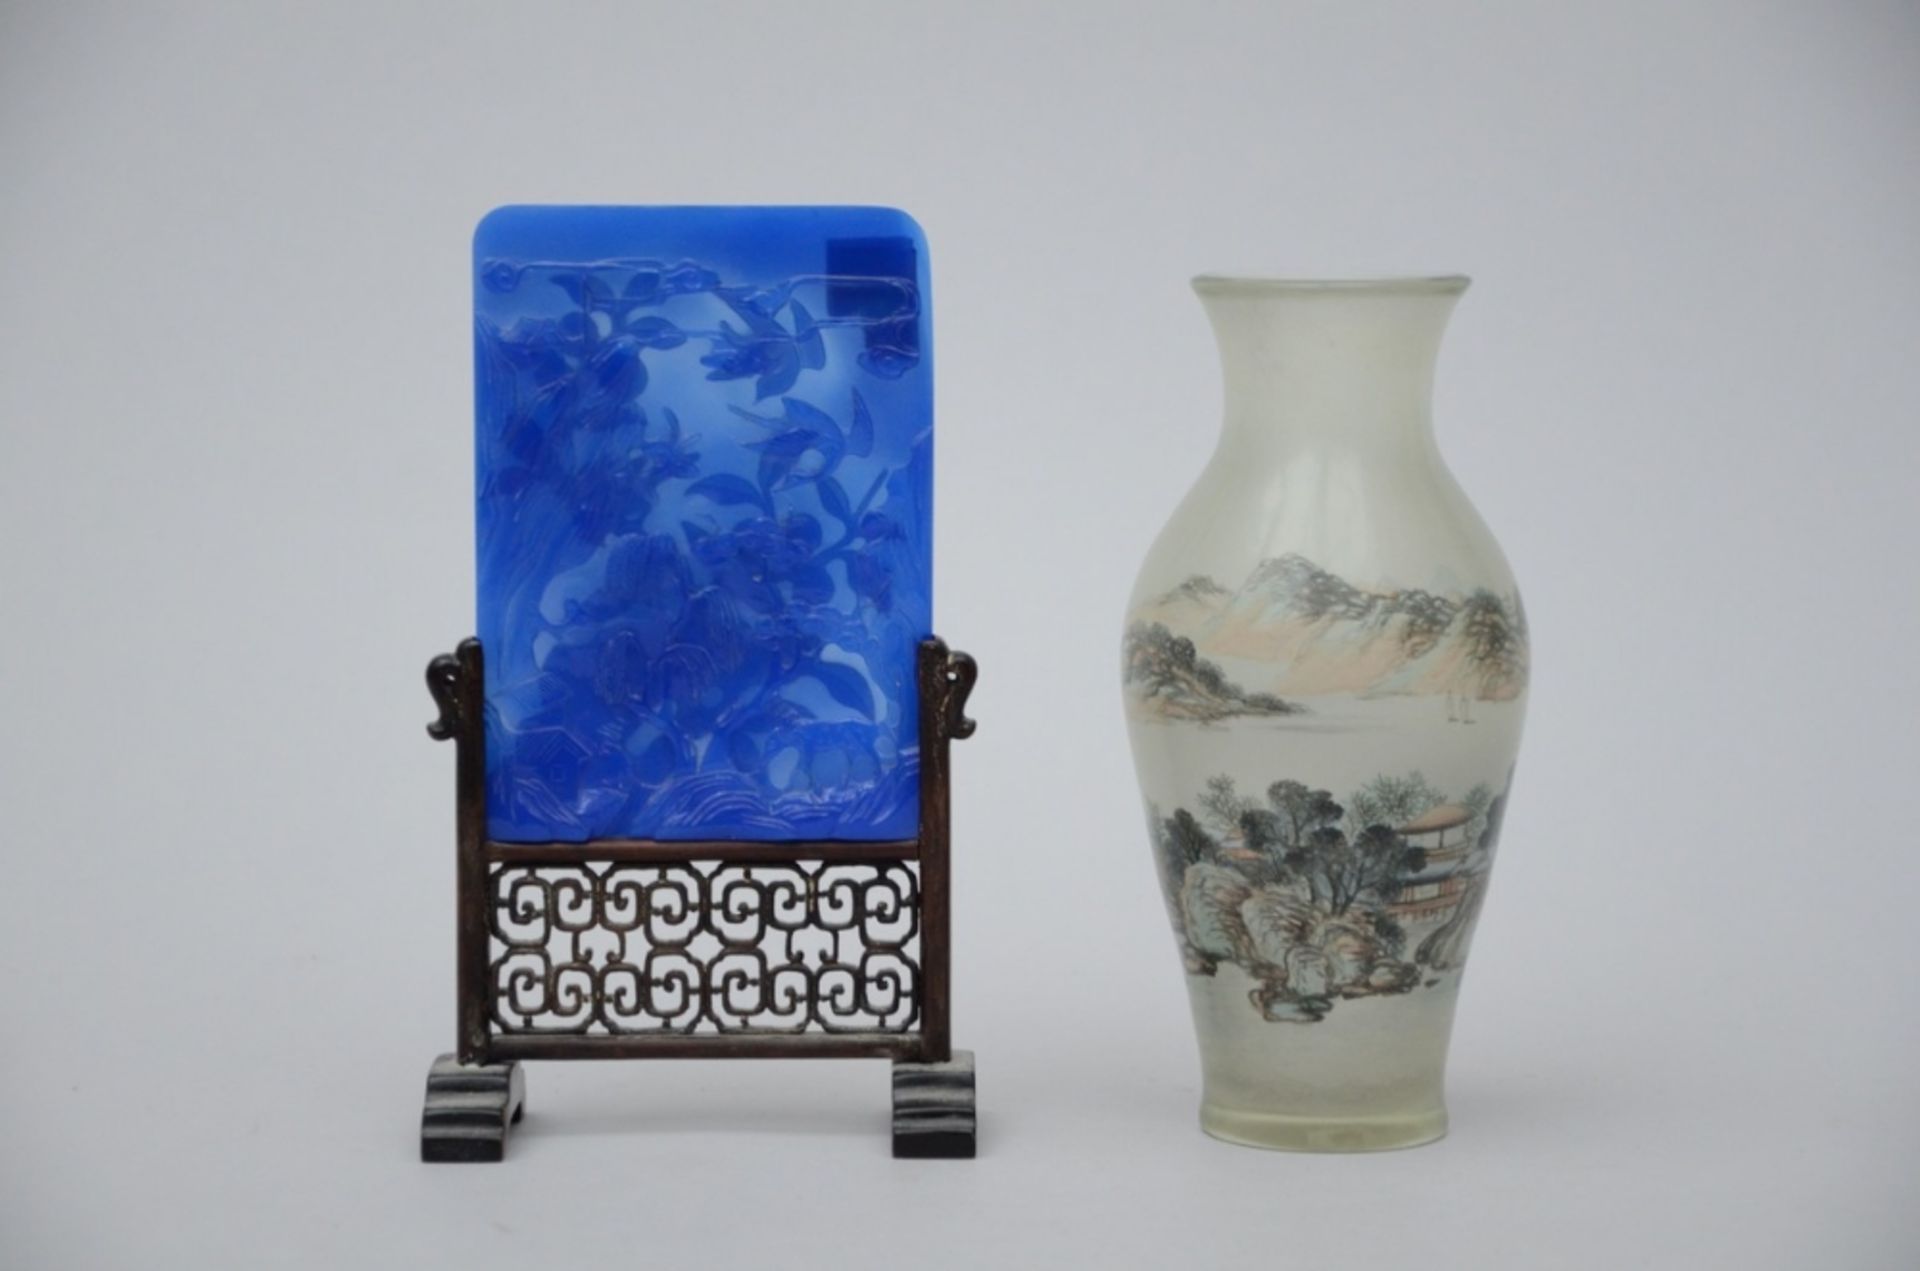 Chinese vase in painted glass (h20.5cm) + small table screen in Peking glass (glass 15x10.5cm)